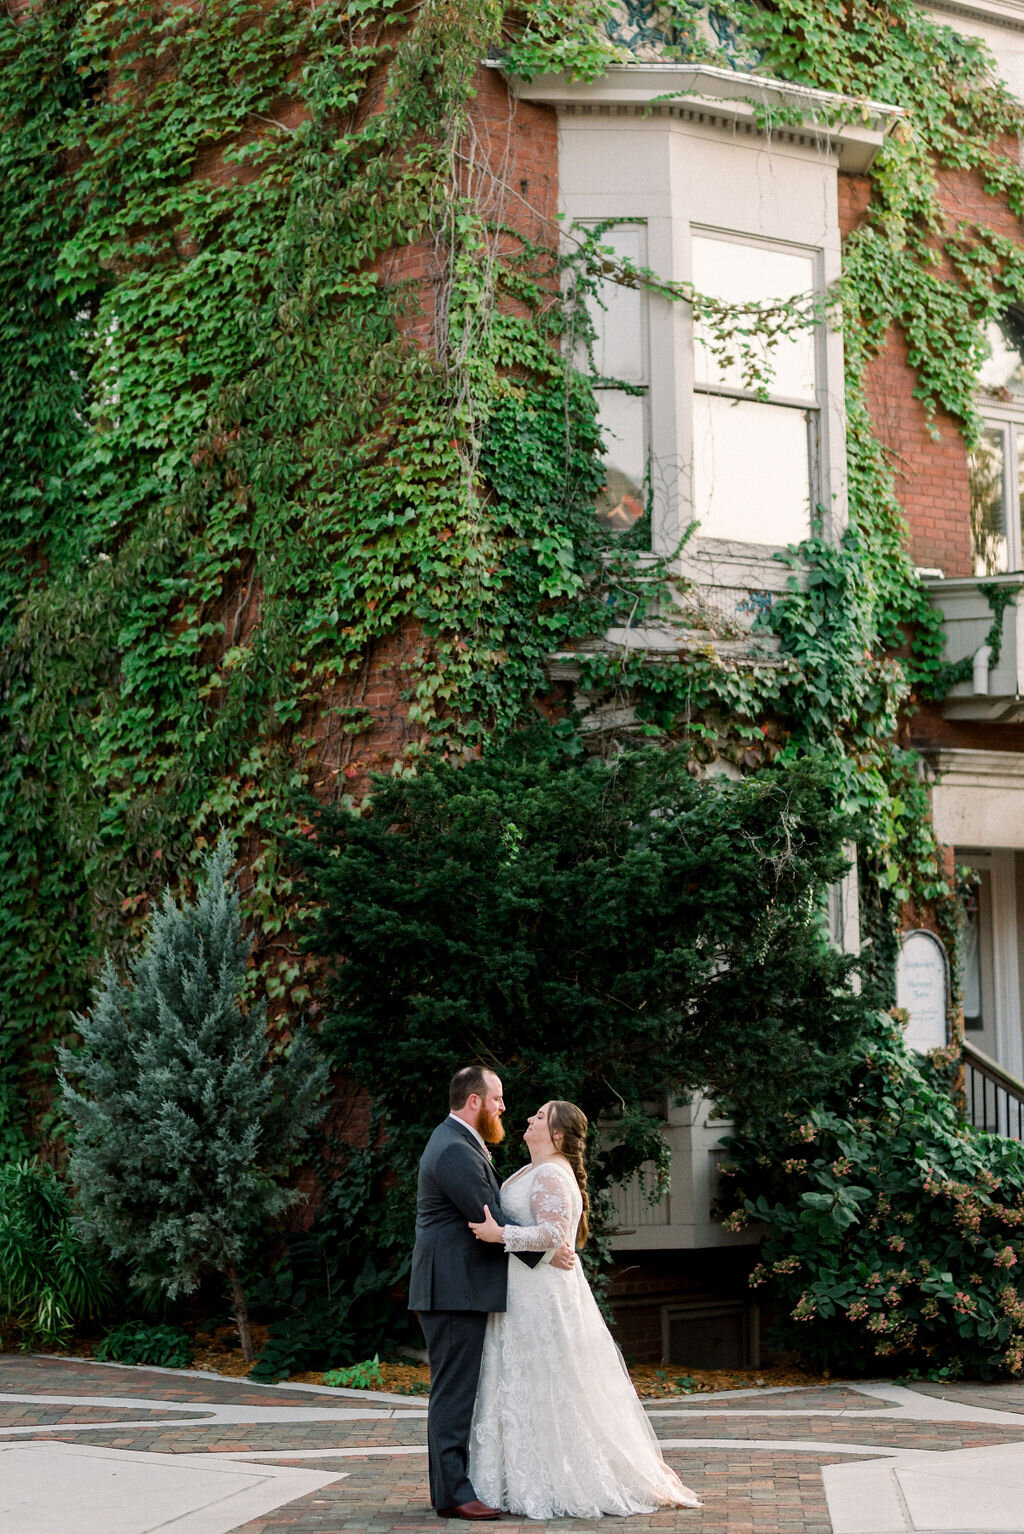 West Lafayette ecclectic wedding with rich colors by Burman Photography47